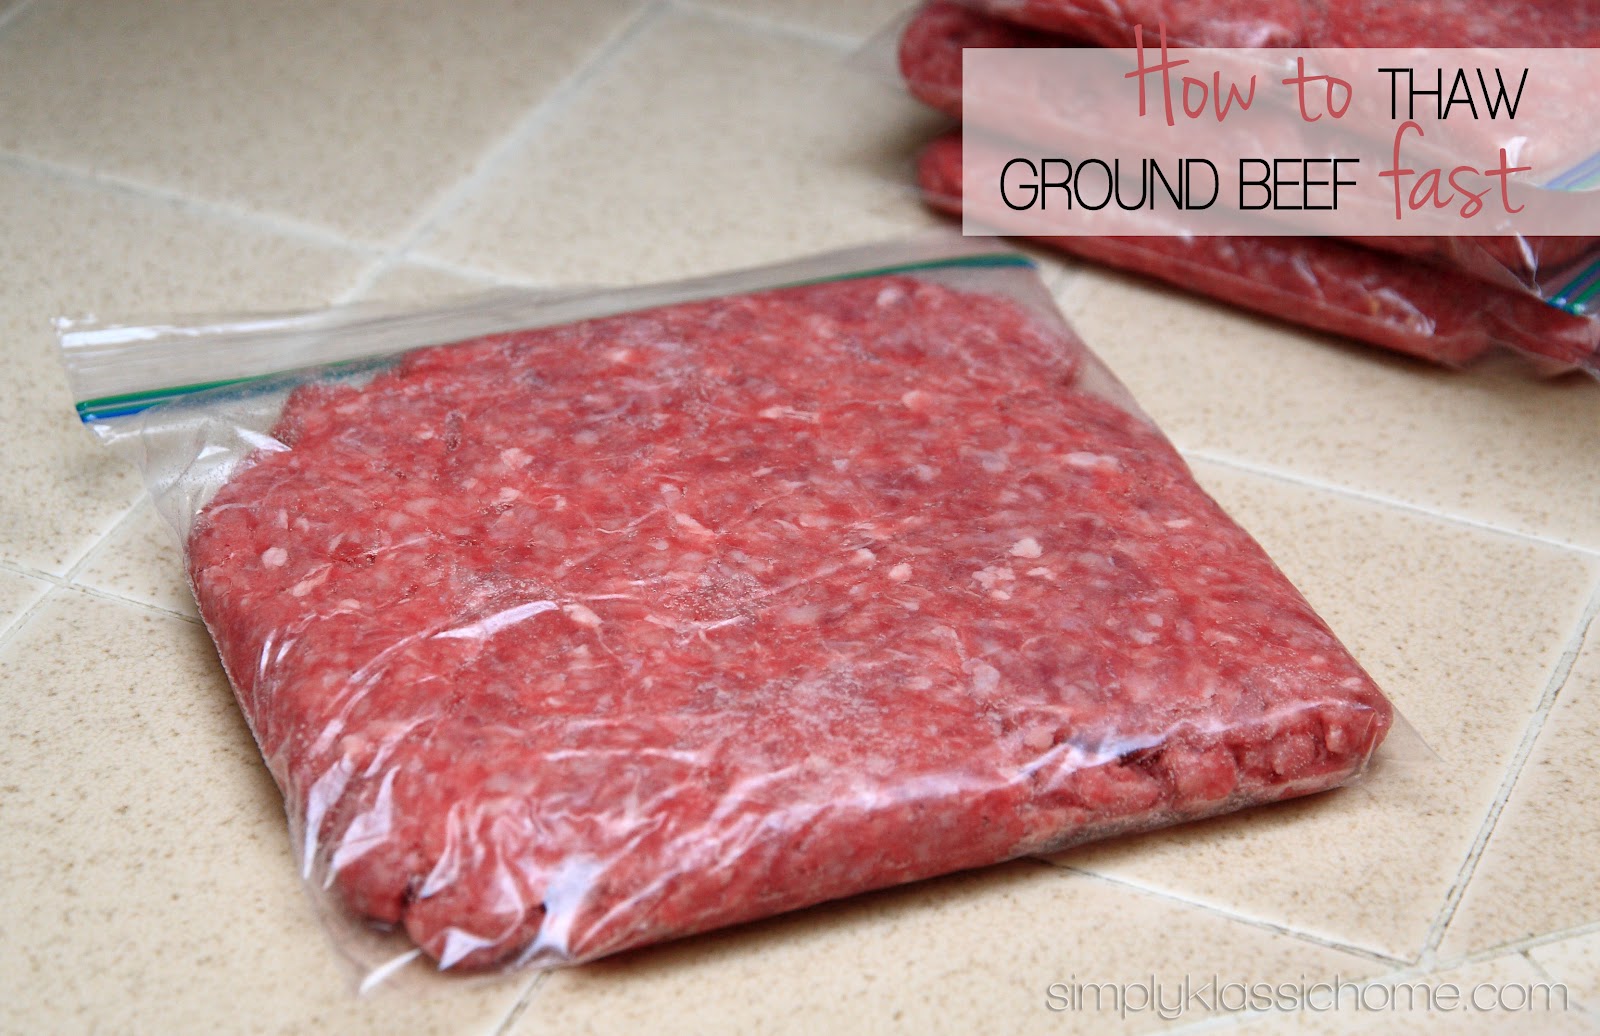 How long is thawed out ground beef good for?